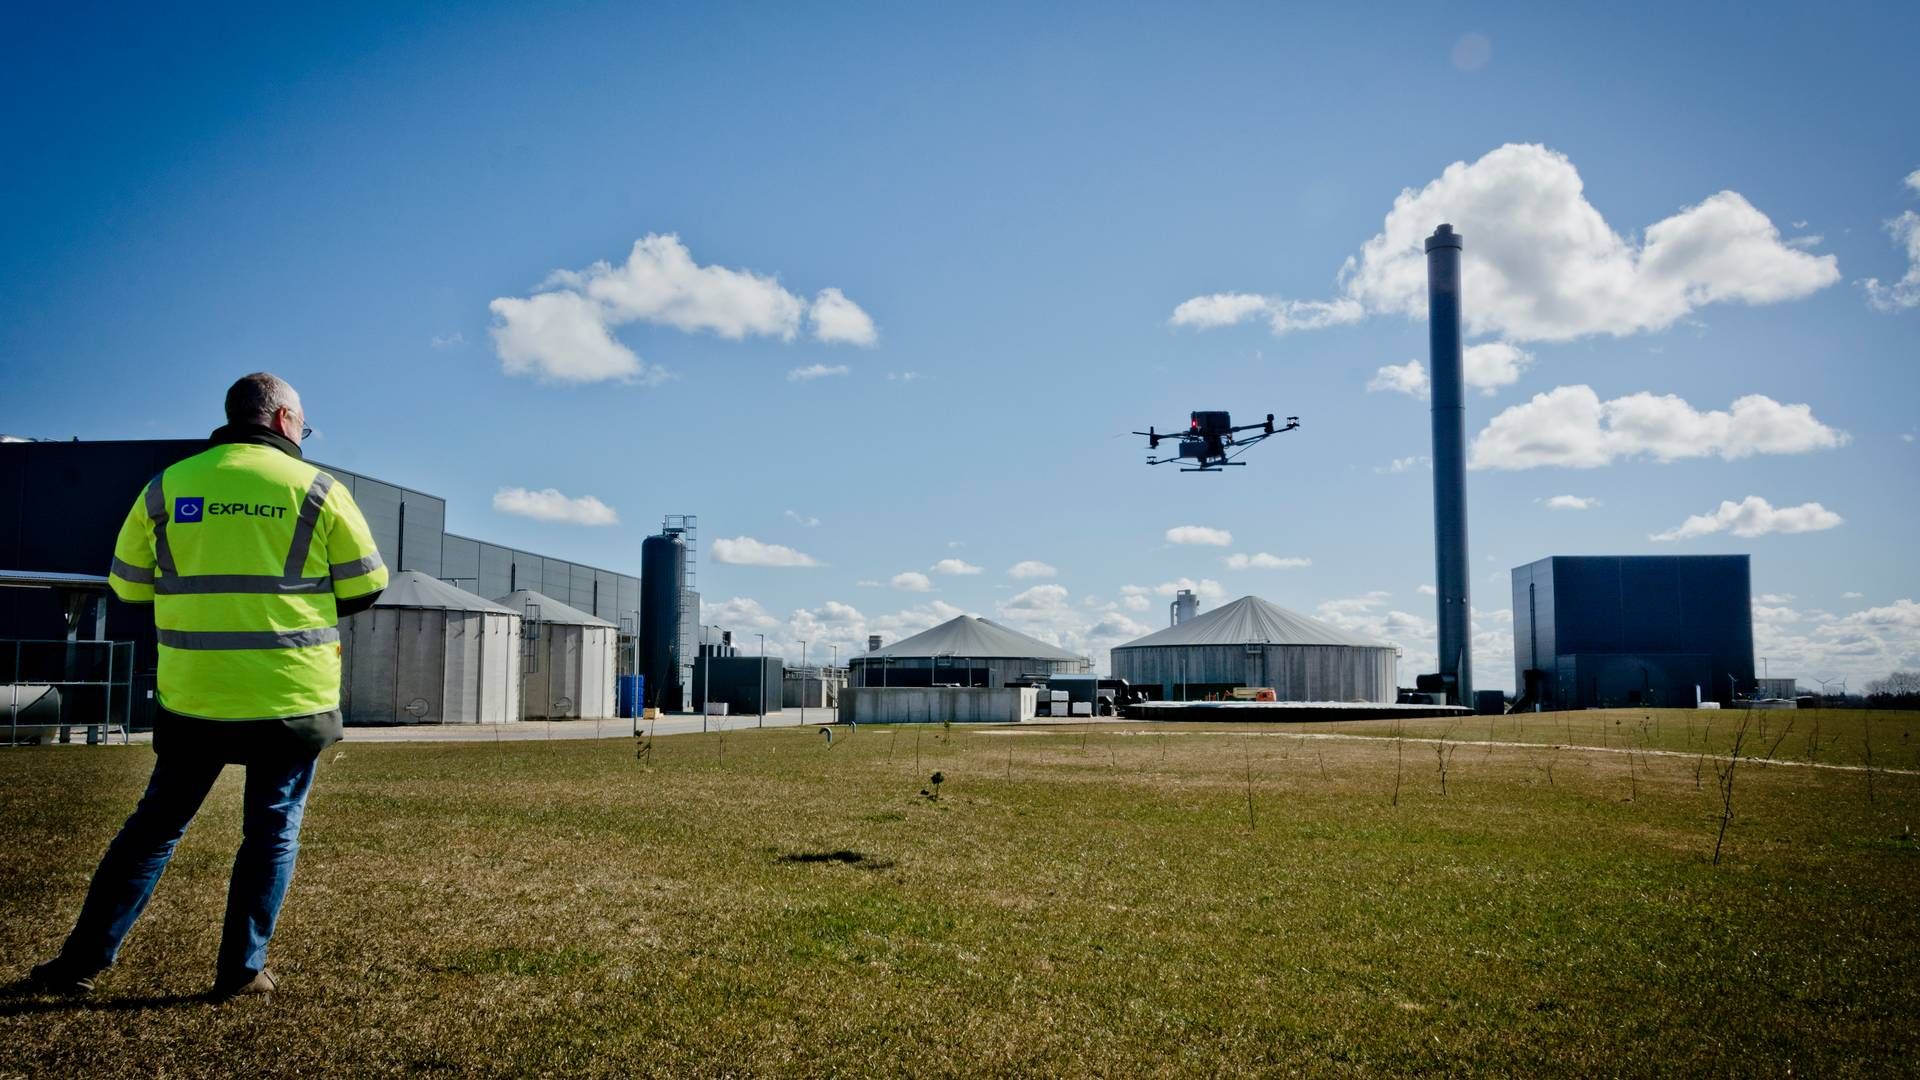 An Explicit drone at work on a biogas facility. | Photo: Explicit Pr